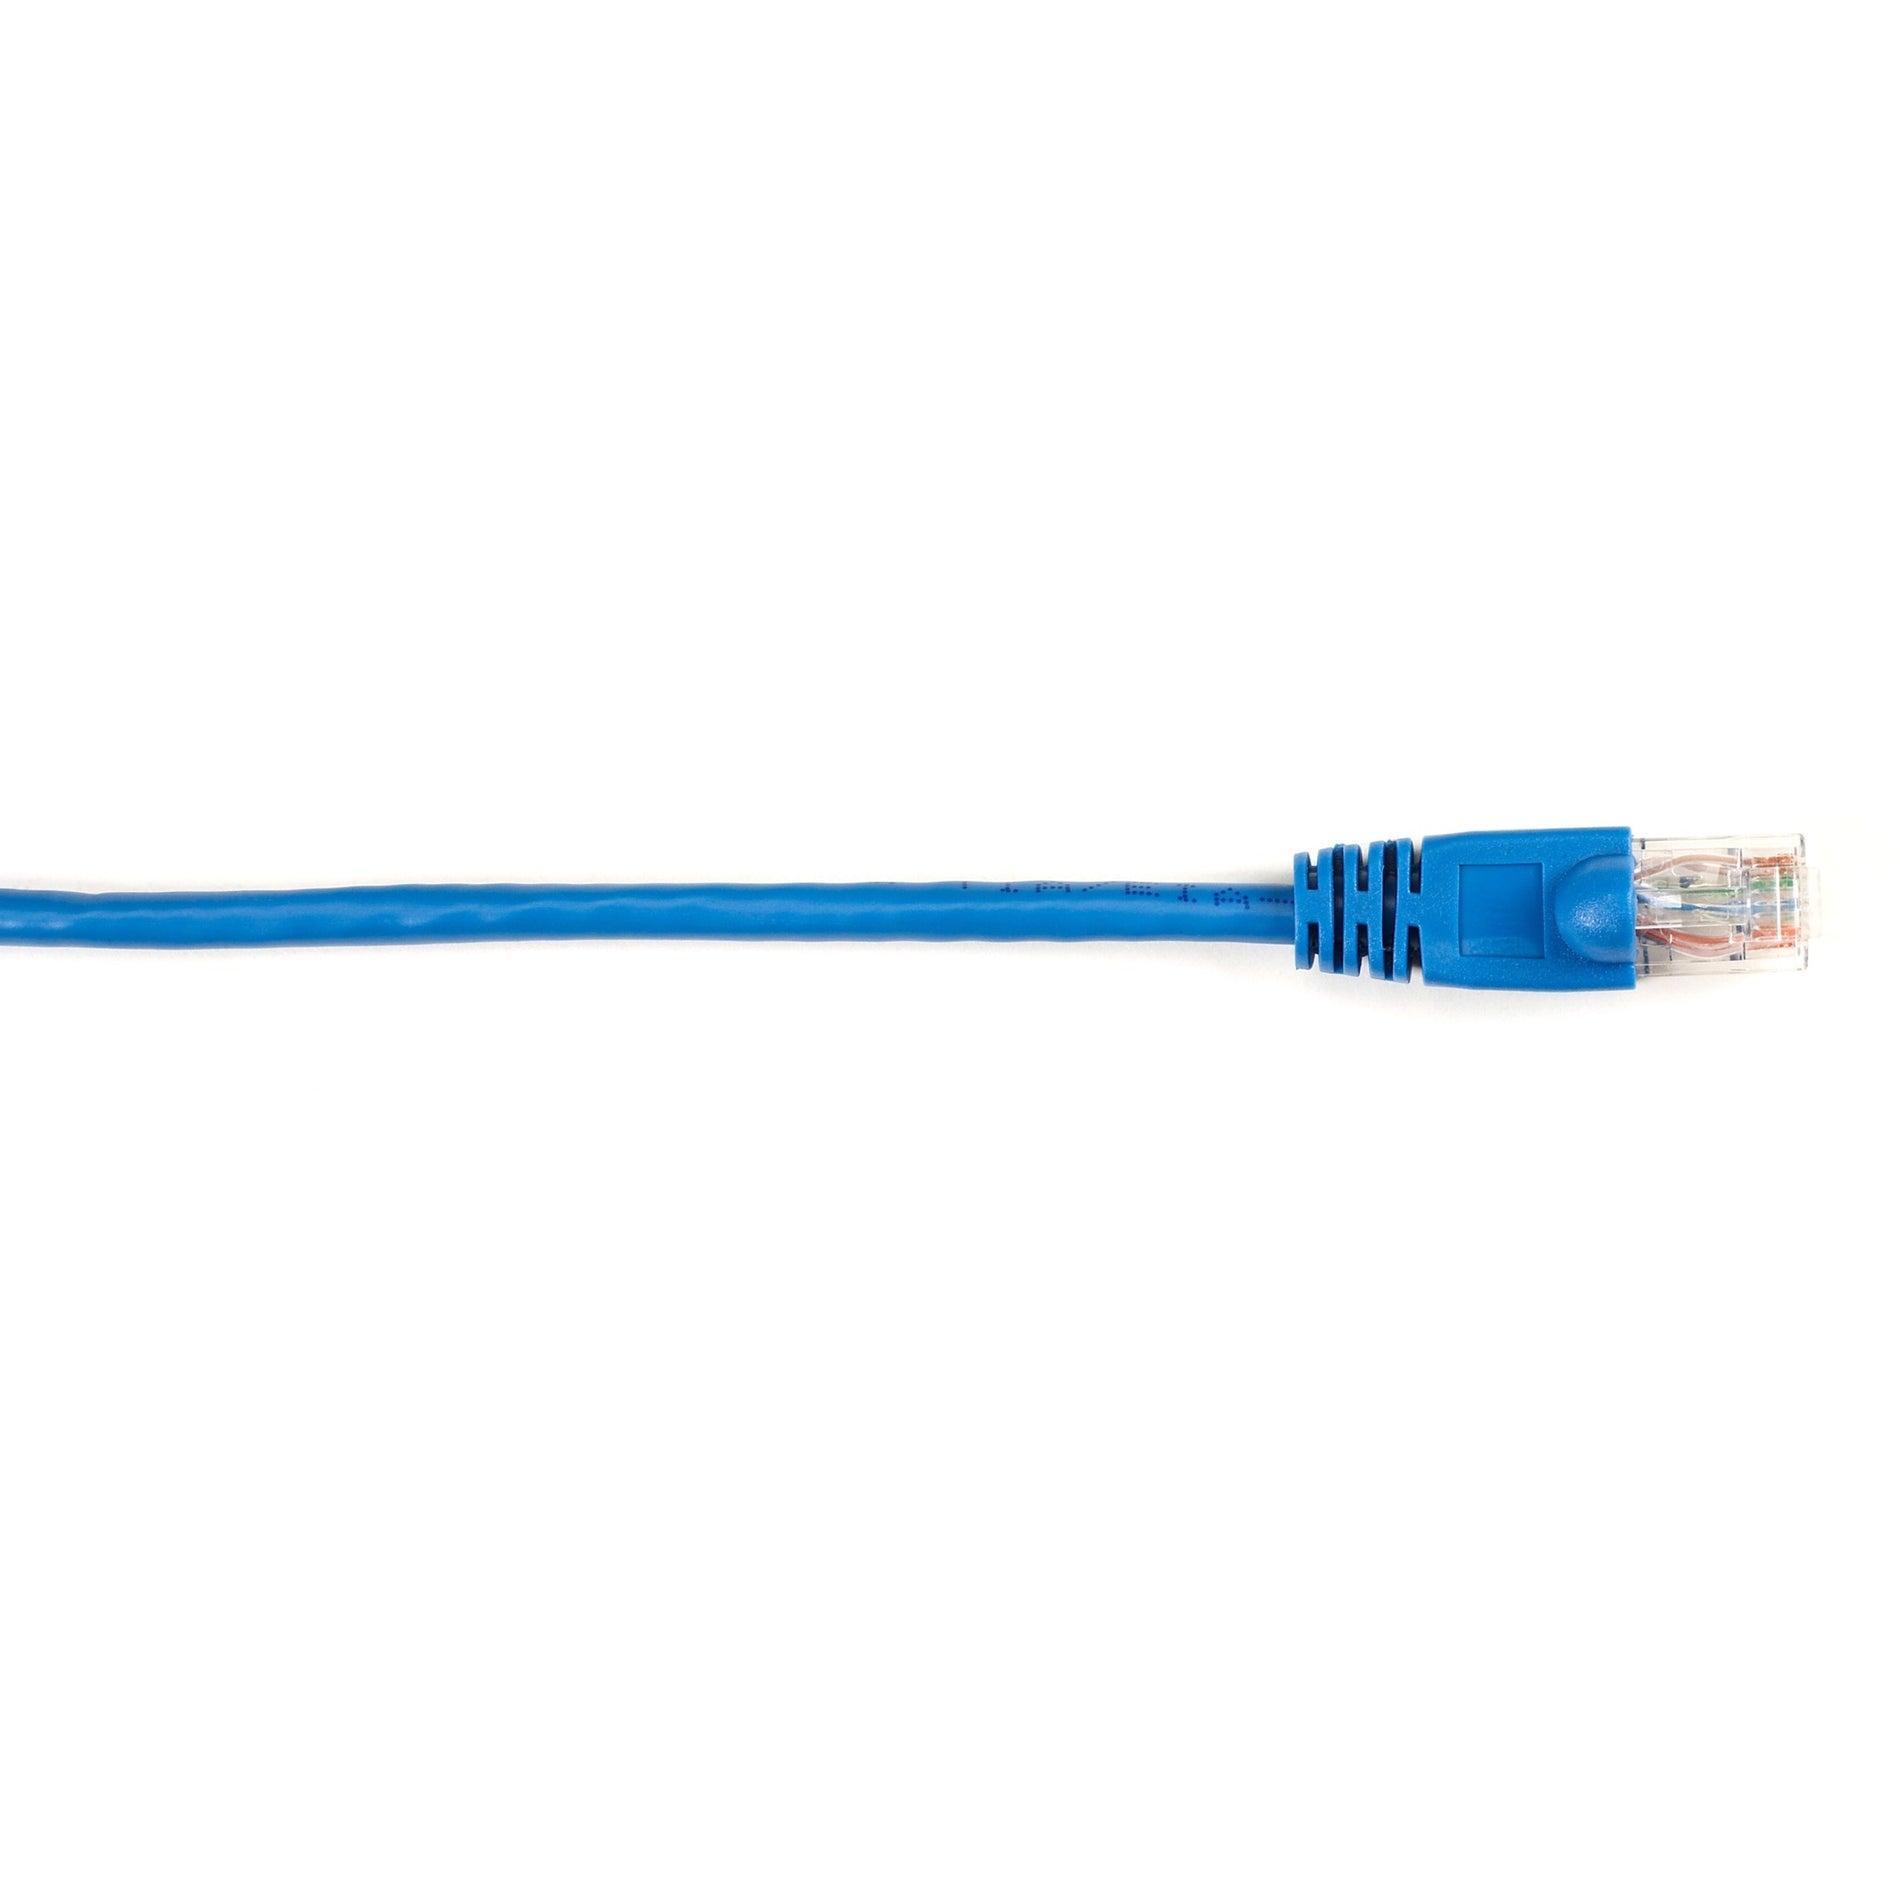 Black Box CAT6PC-025-BL Connect Cat.6 UTP Patch Network Cable, 25 ft, Blue, 2 Year Warranty